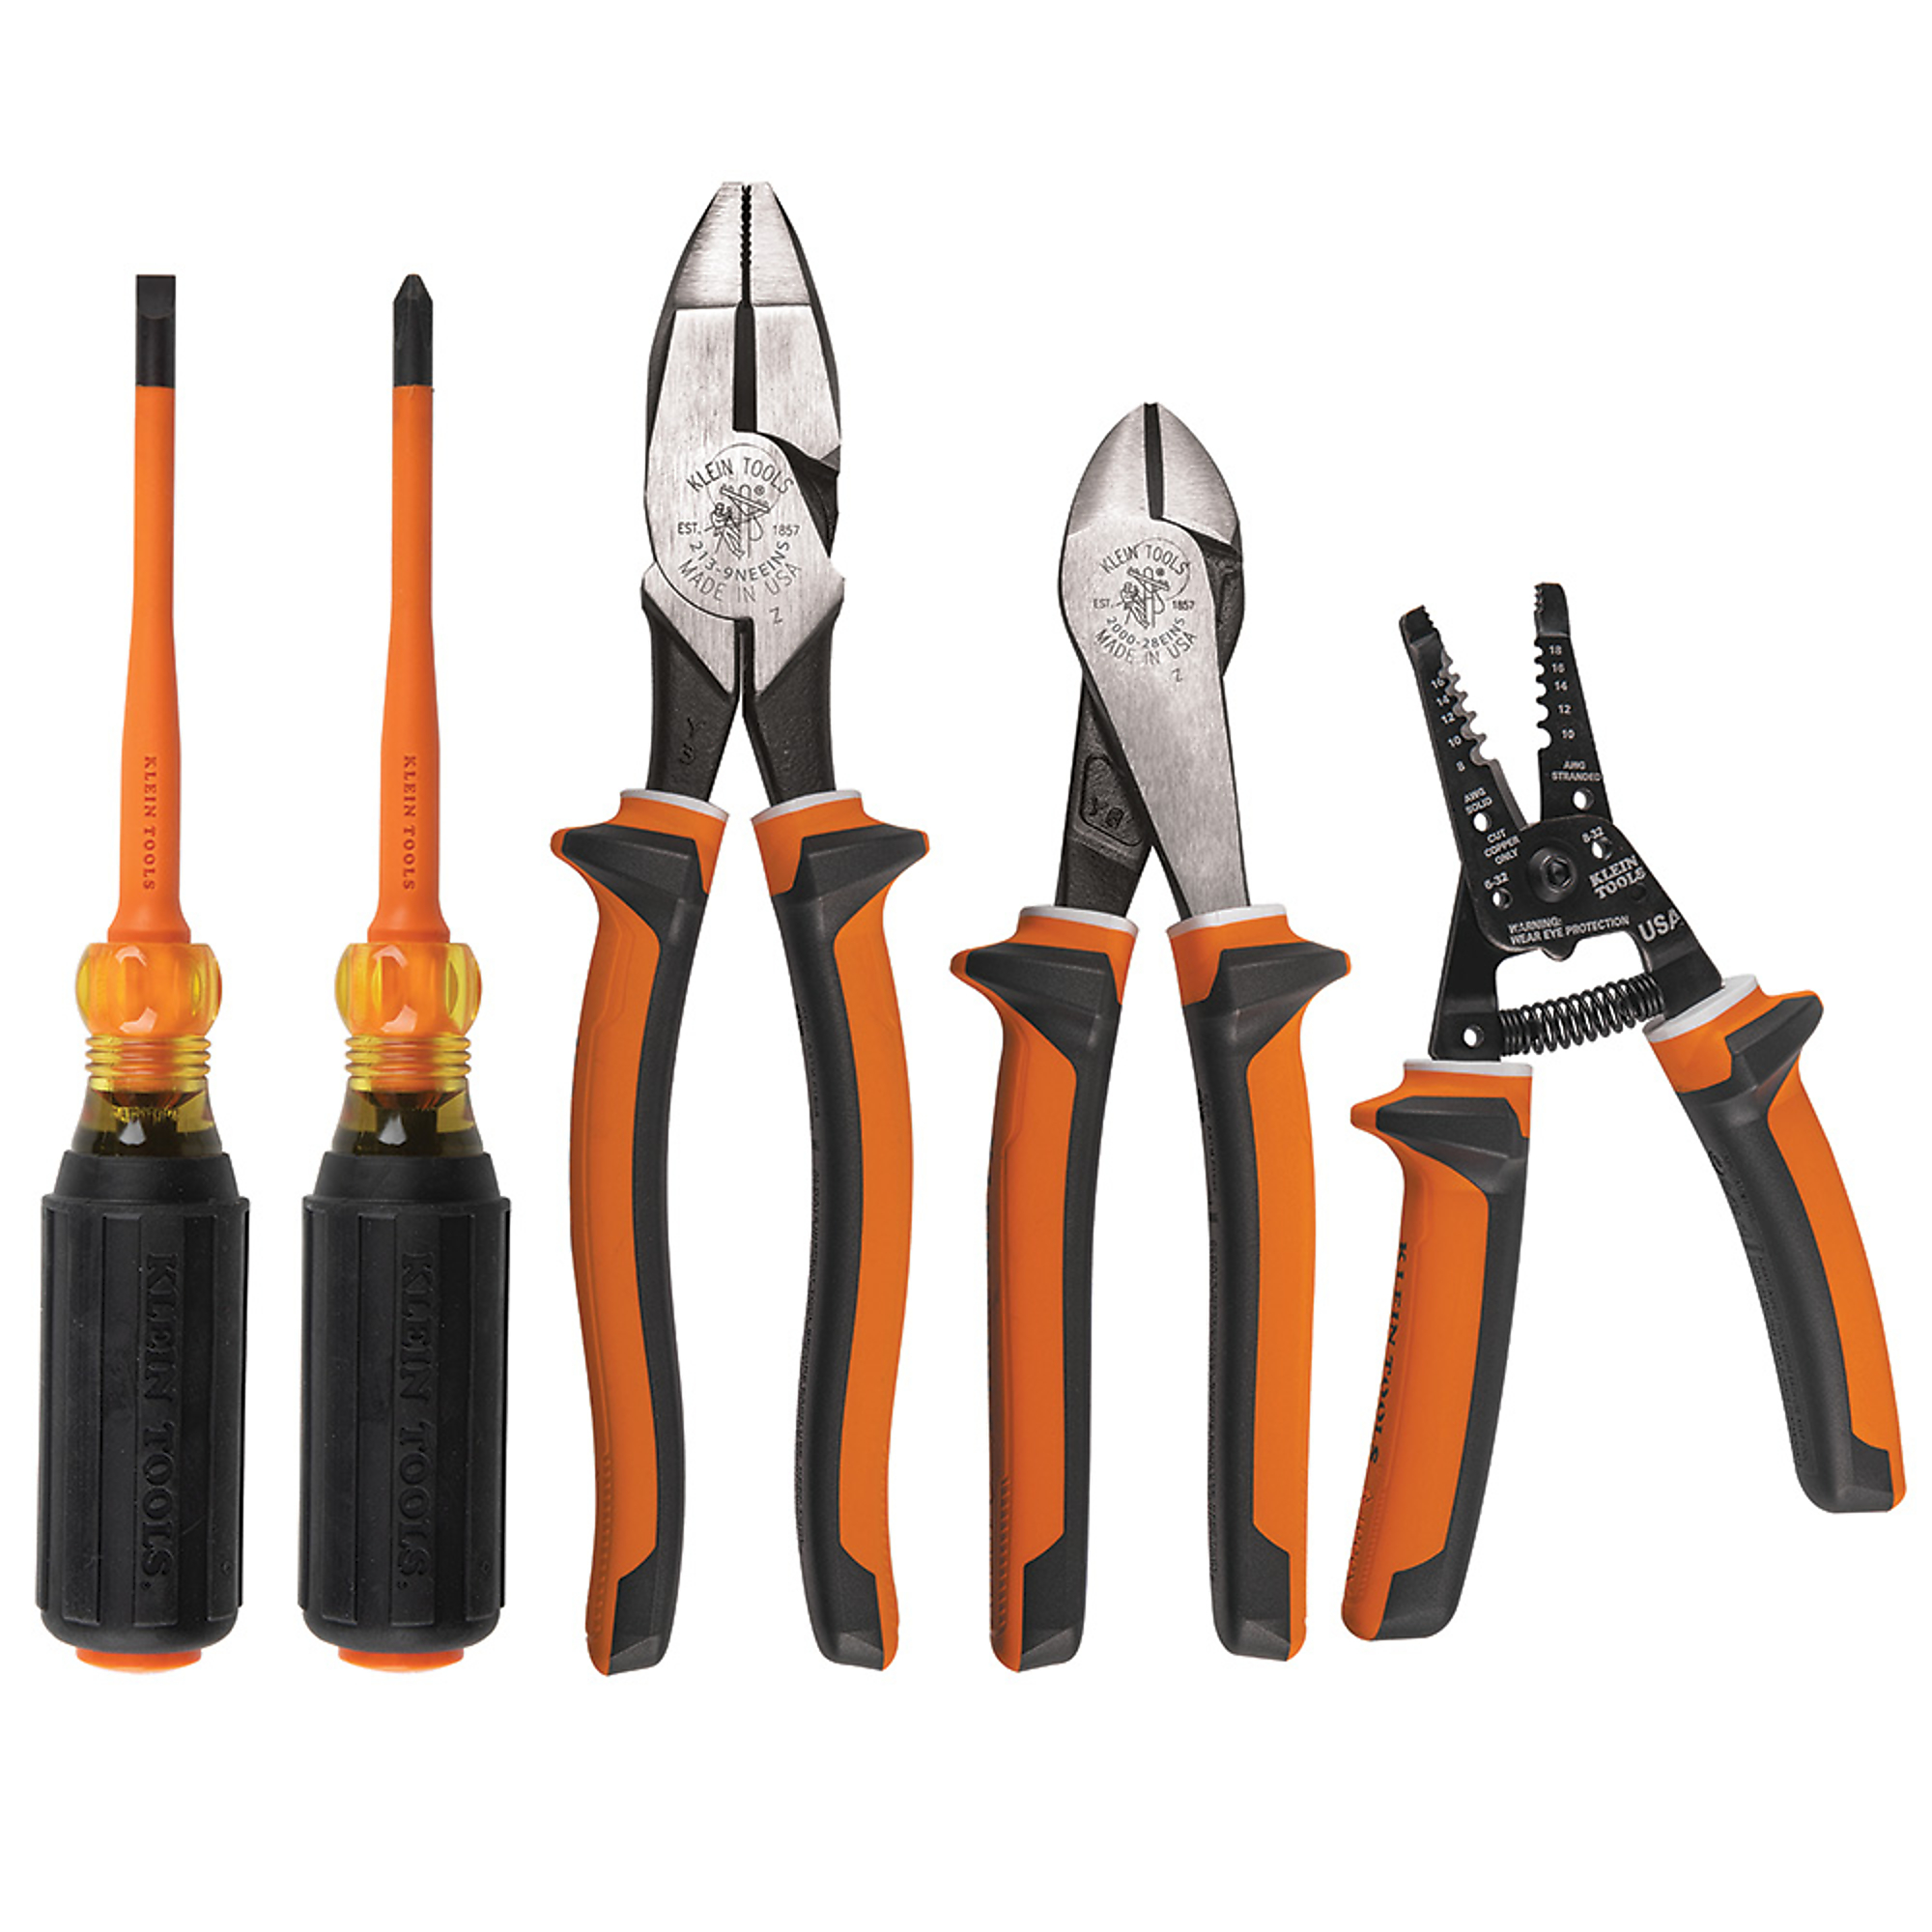 Klein Tools, 1000V Insulated Tool Kit, 5-Piece, Pieces (qty.) 5 Model 94130